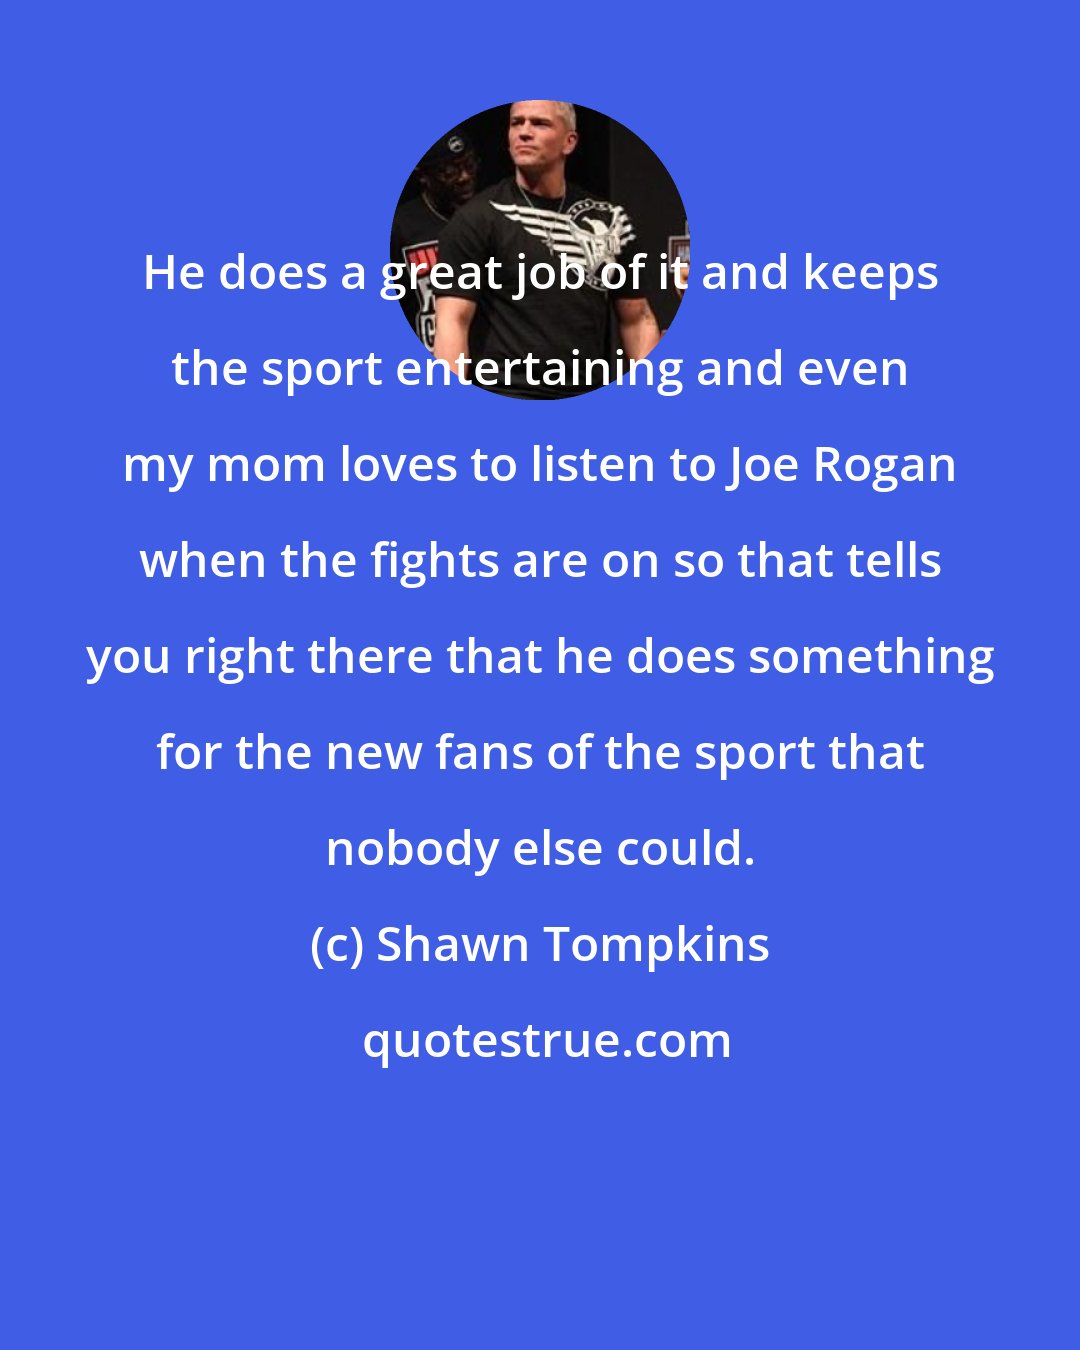 Shawn Tompkins: He does a great job of it and keeps the sport entertaining and even my mom loves to listen to Joe Rogan when the fights are on so that tells you right there that he does something for the new fans of the sport that nobody else could.